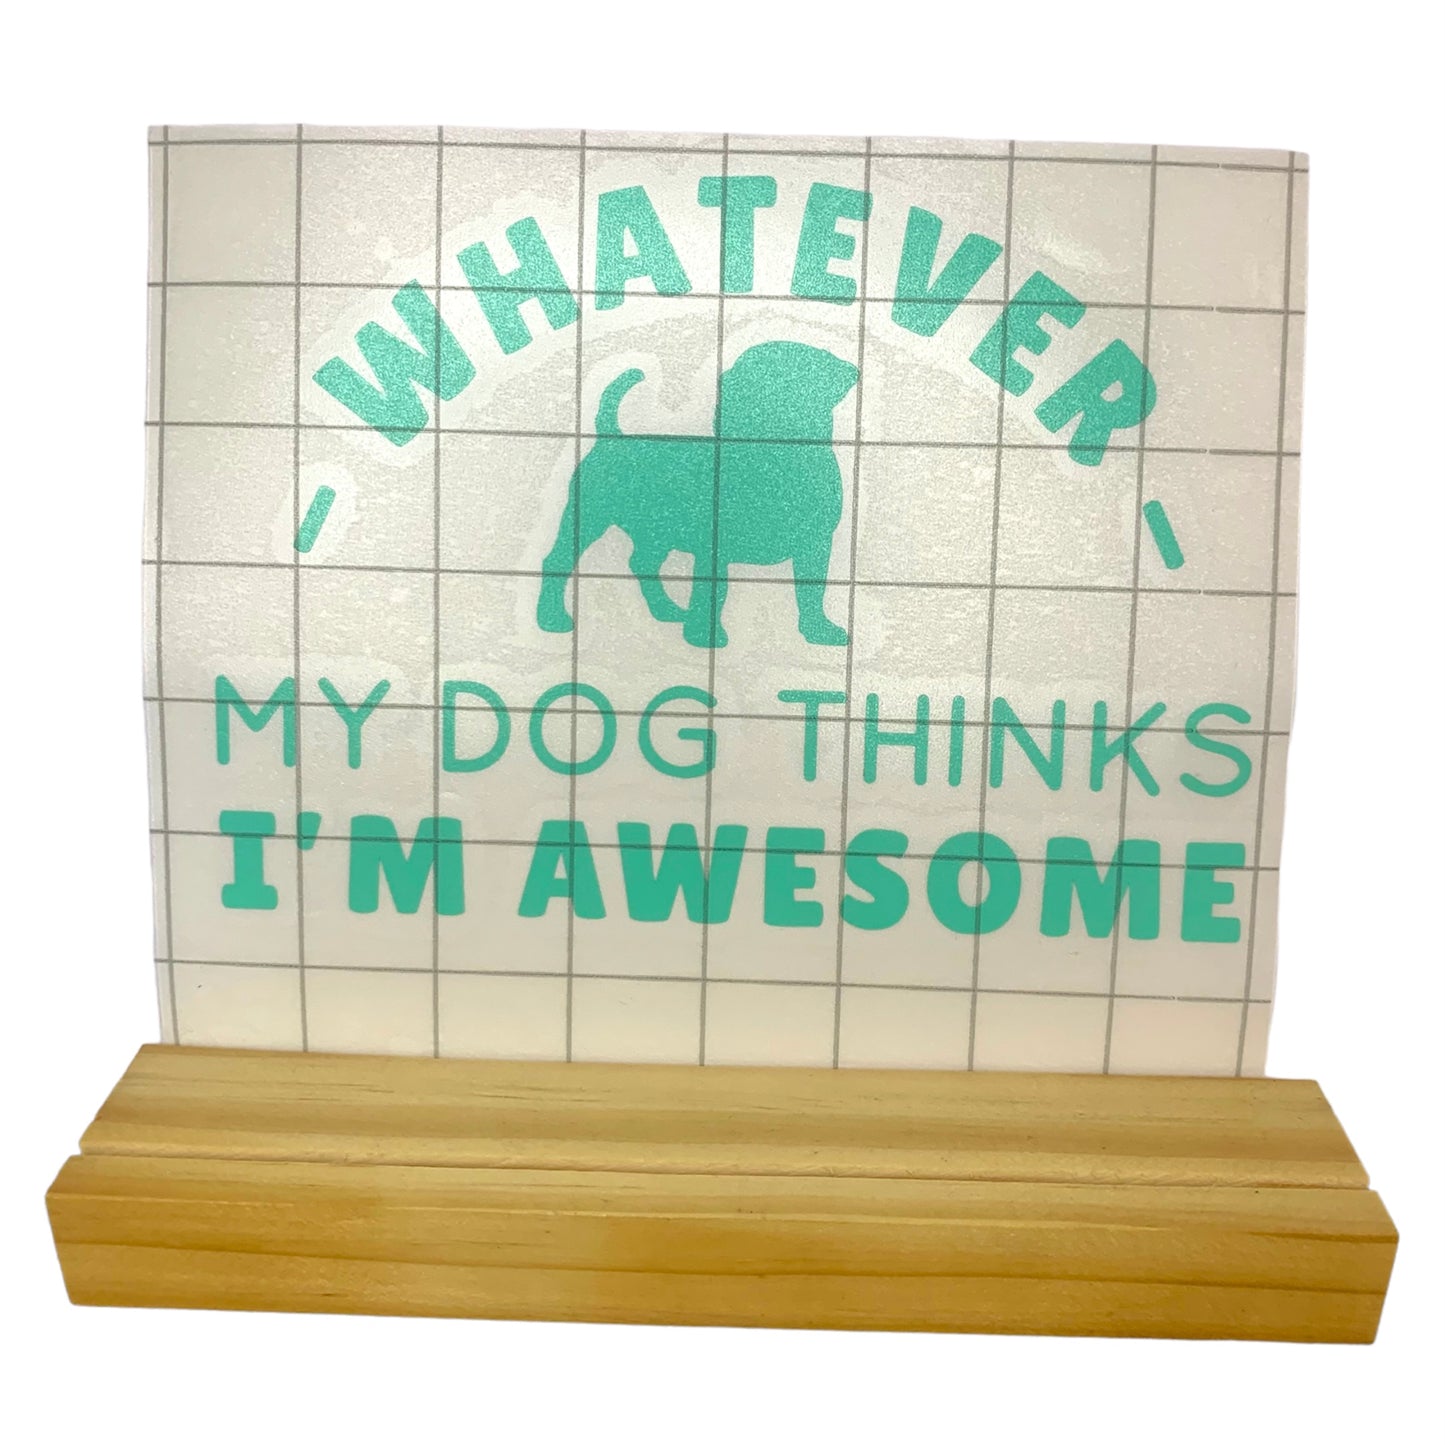 My Dog Thinks I’m Awesome decal